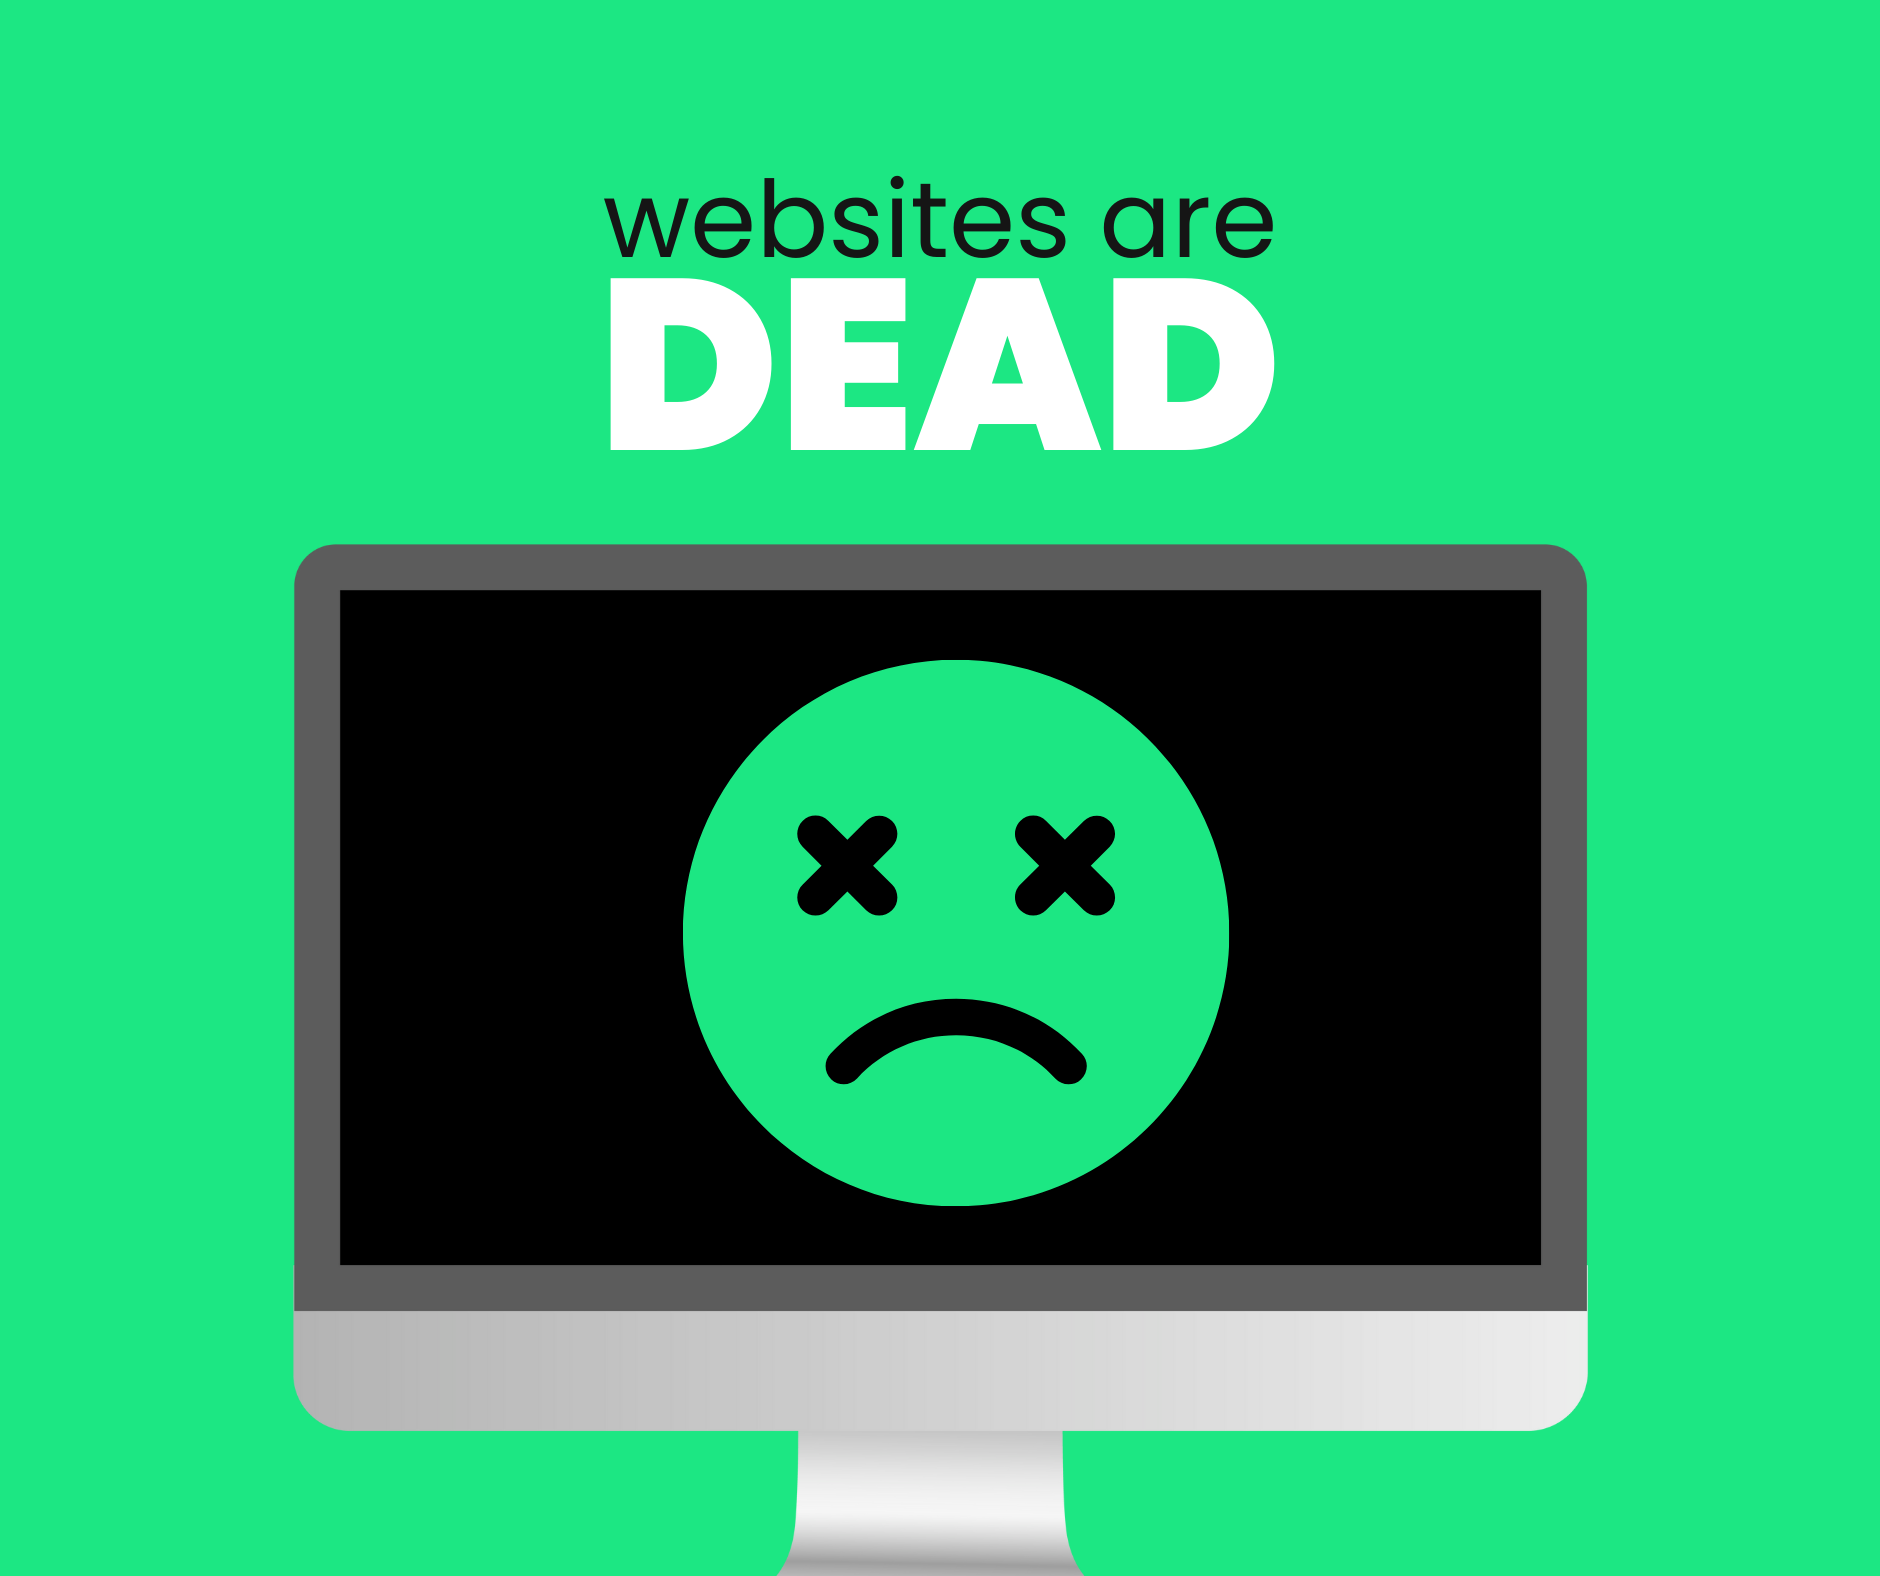 Featured image for “A website without a business strategy is dead and outdated. ”